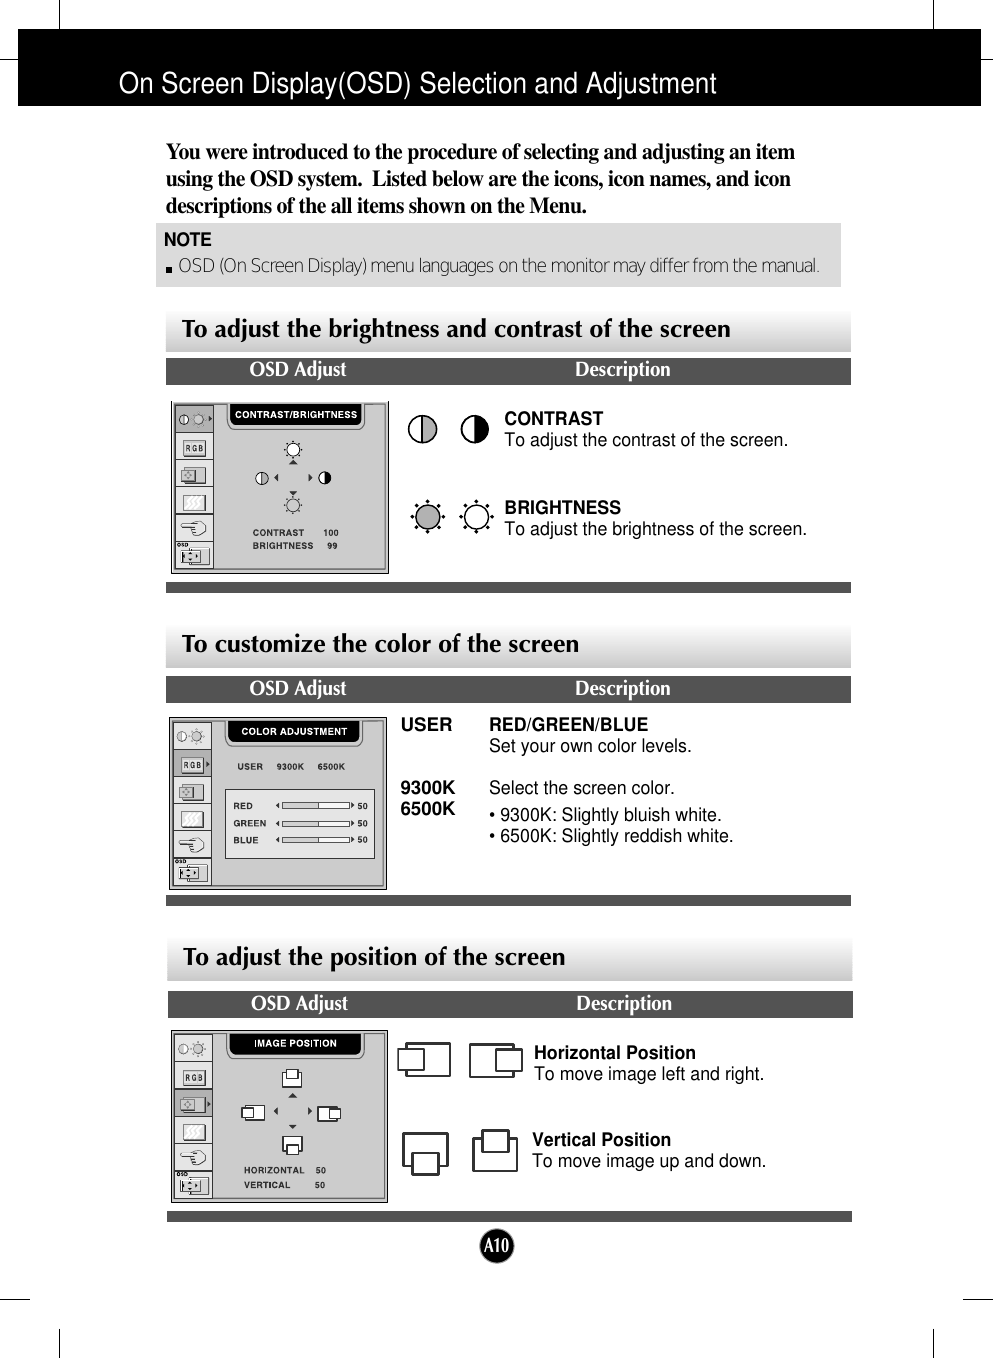 A10On Screen Display(OSD) Selection and Adjustment NOTEOSD (On Screen Display) menu languages on the monitor may differ from the manual.You were introduced to the procedure of selecting and adjusting an itemusing the OSD system.  Listed below are the icons, icon names, and icondescriptions of the all items shown on the Menu.OSD Adjust DescriptionBRIGHTNESSTo adjust the brightness of the screen. CONTRAST To adjust the contrast of the screen.Vertical PositionTo move image up and down.Horizontal PositionTo move image left and right.To adjust the brightness and contrast of the screenTo adjust the position of the screen OSD Adjust DescriptionTo customize the color of the screenOSD Adjust DescriptionUSER9300K6500KRED/GREEN/BLUESet your own color levels.Select the screen color. • 9300K: Slightly bluish white.• 6500K: Slightly reddish white.